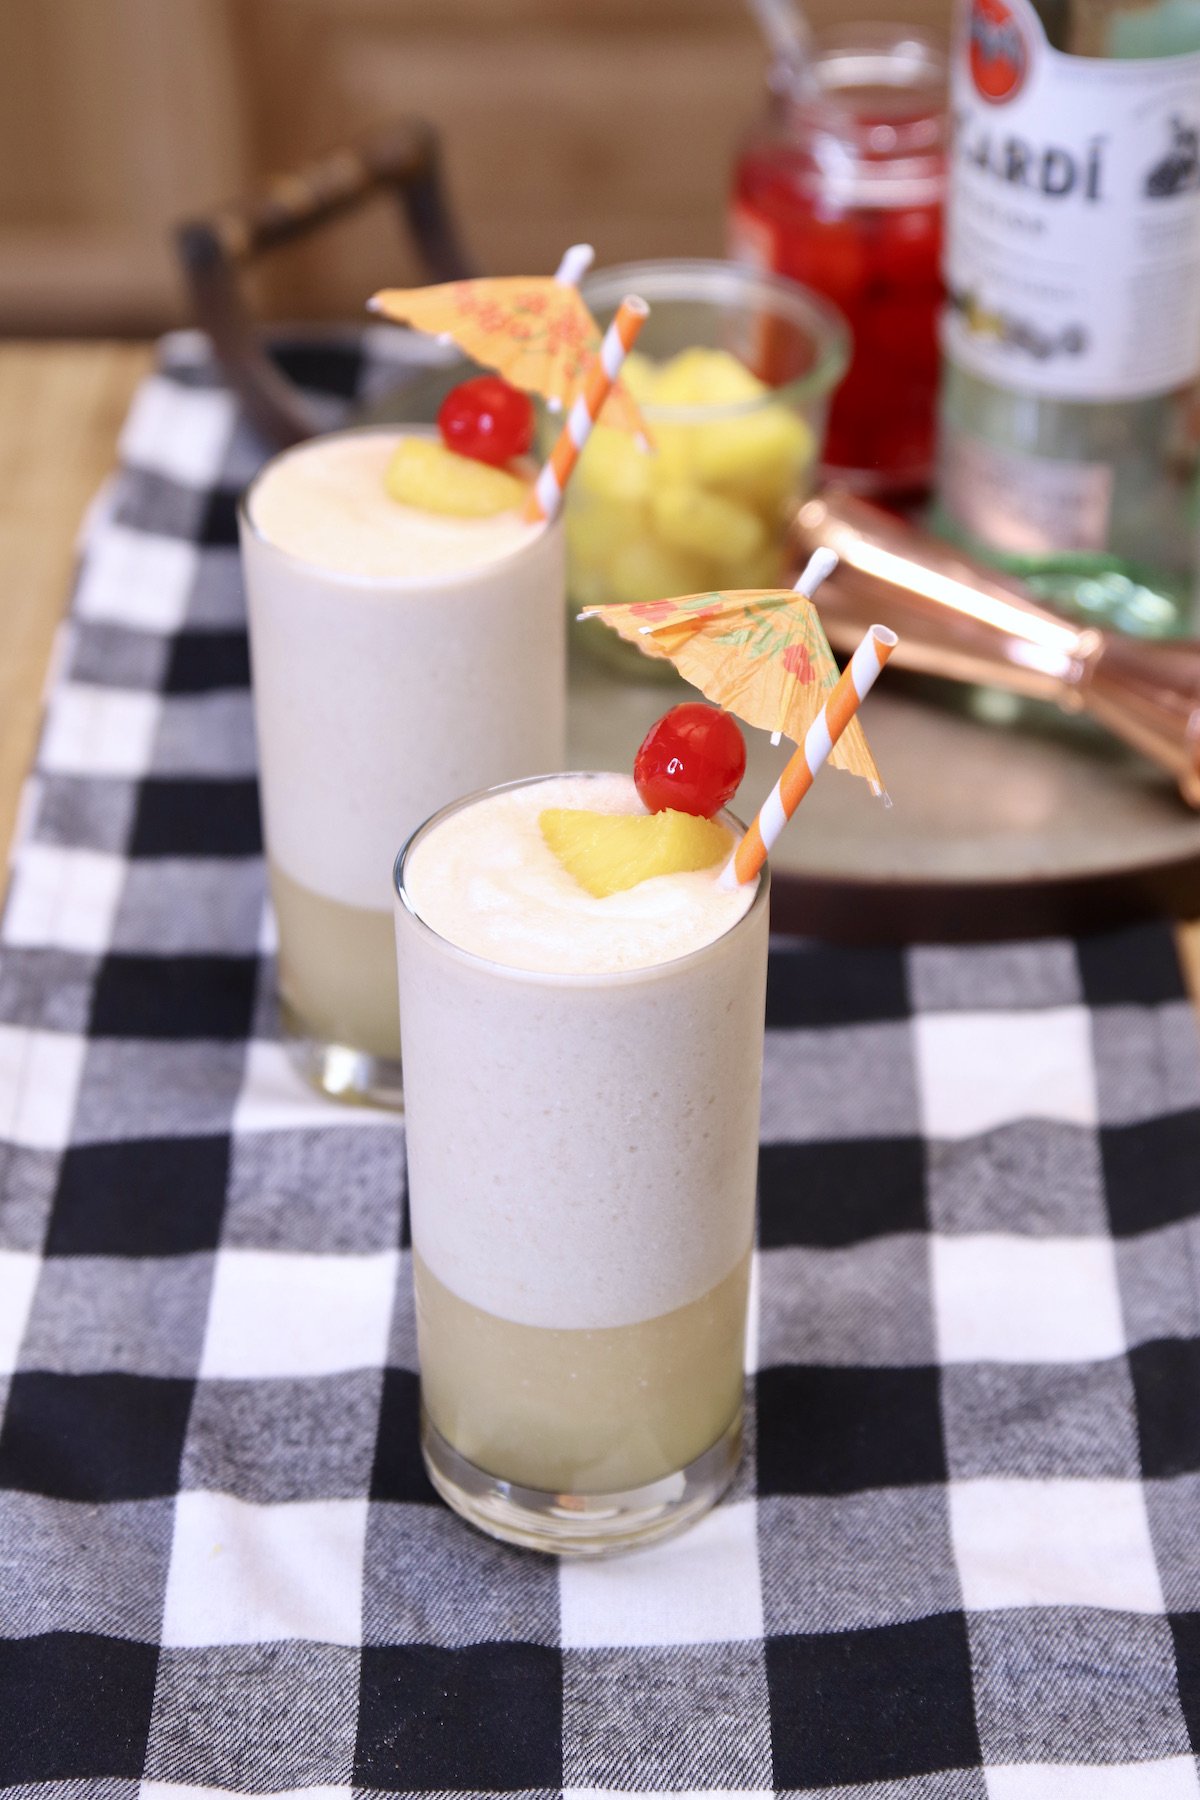 rocket fuel pineapple and coconut cocktails in 2 glasses with cherry/pineapple garnish.